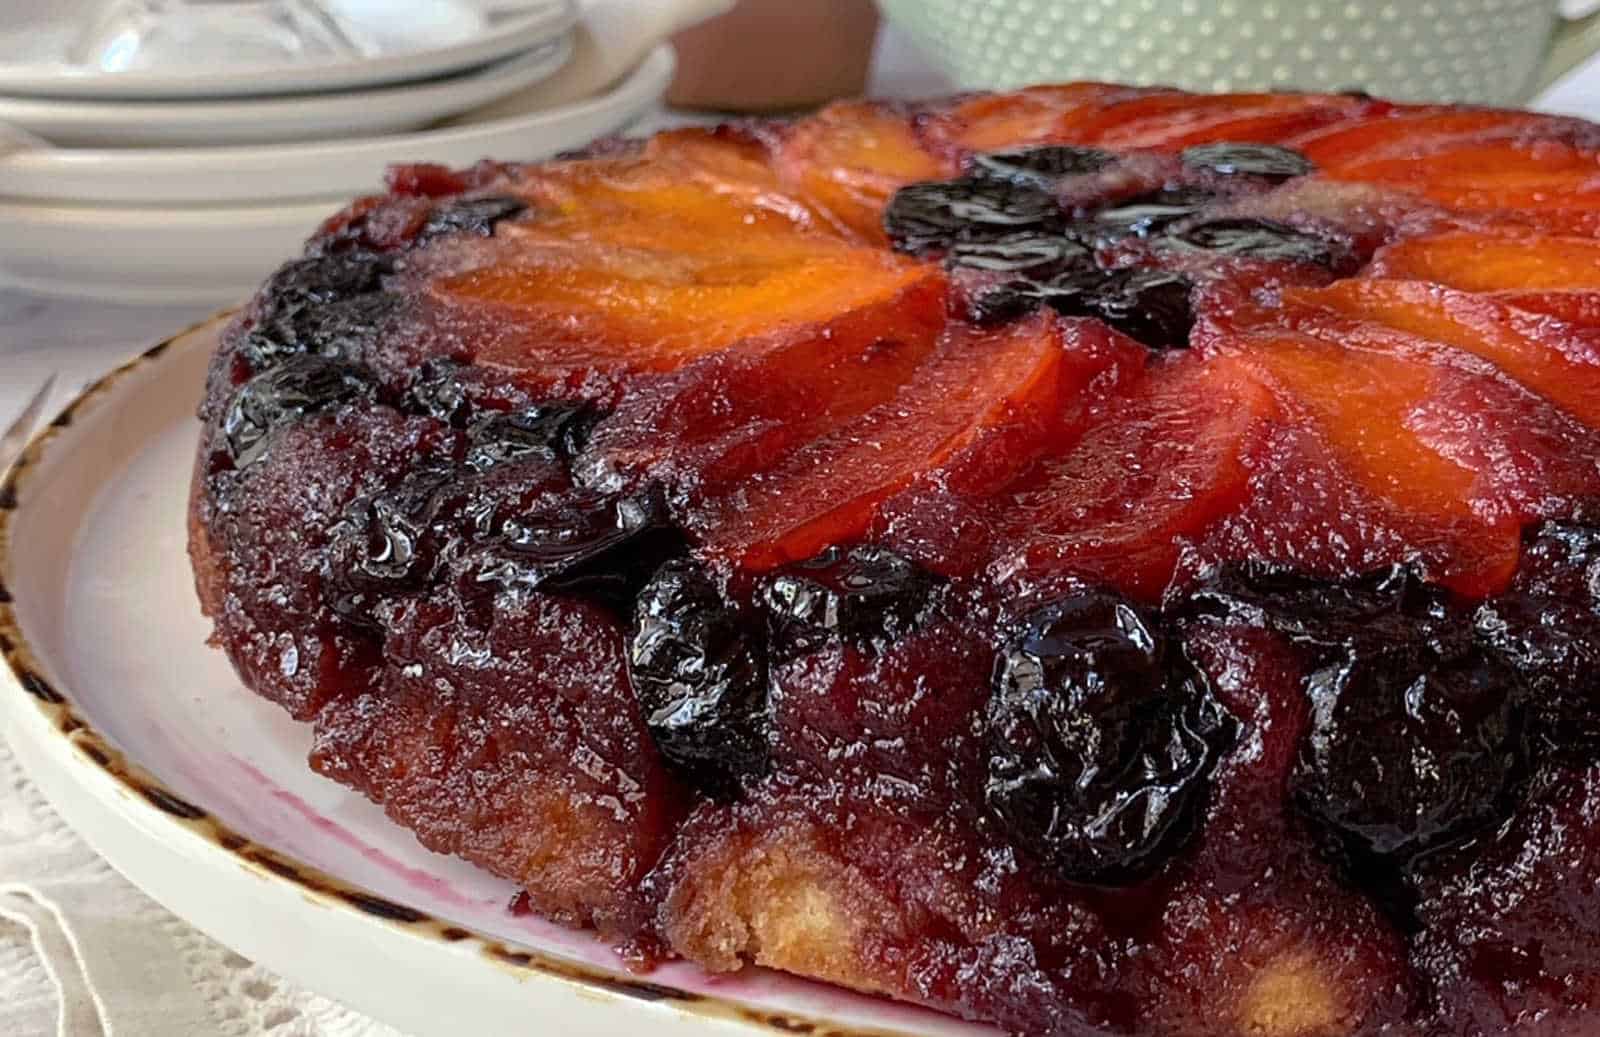 Cherry and apricot upside down cake on a white plate.